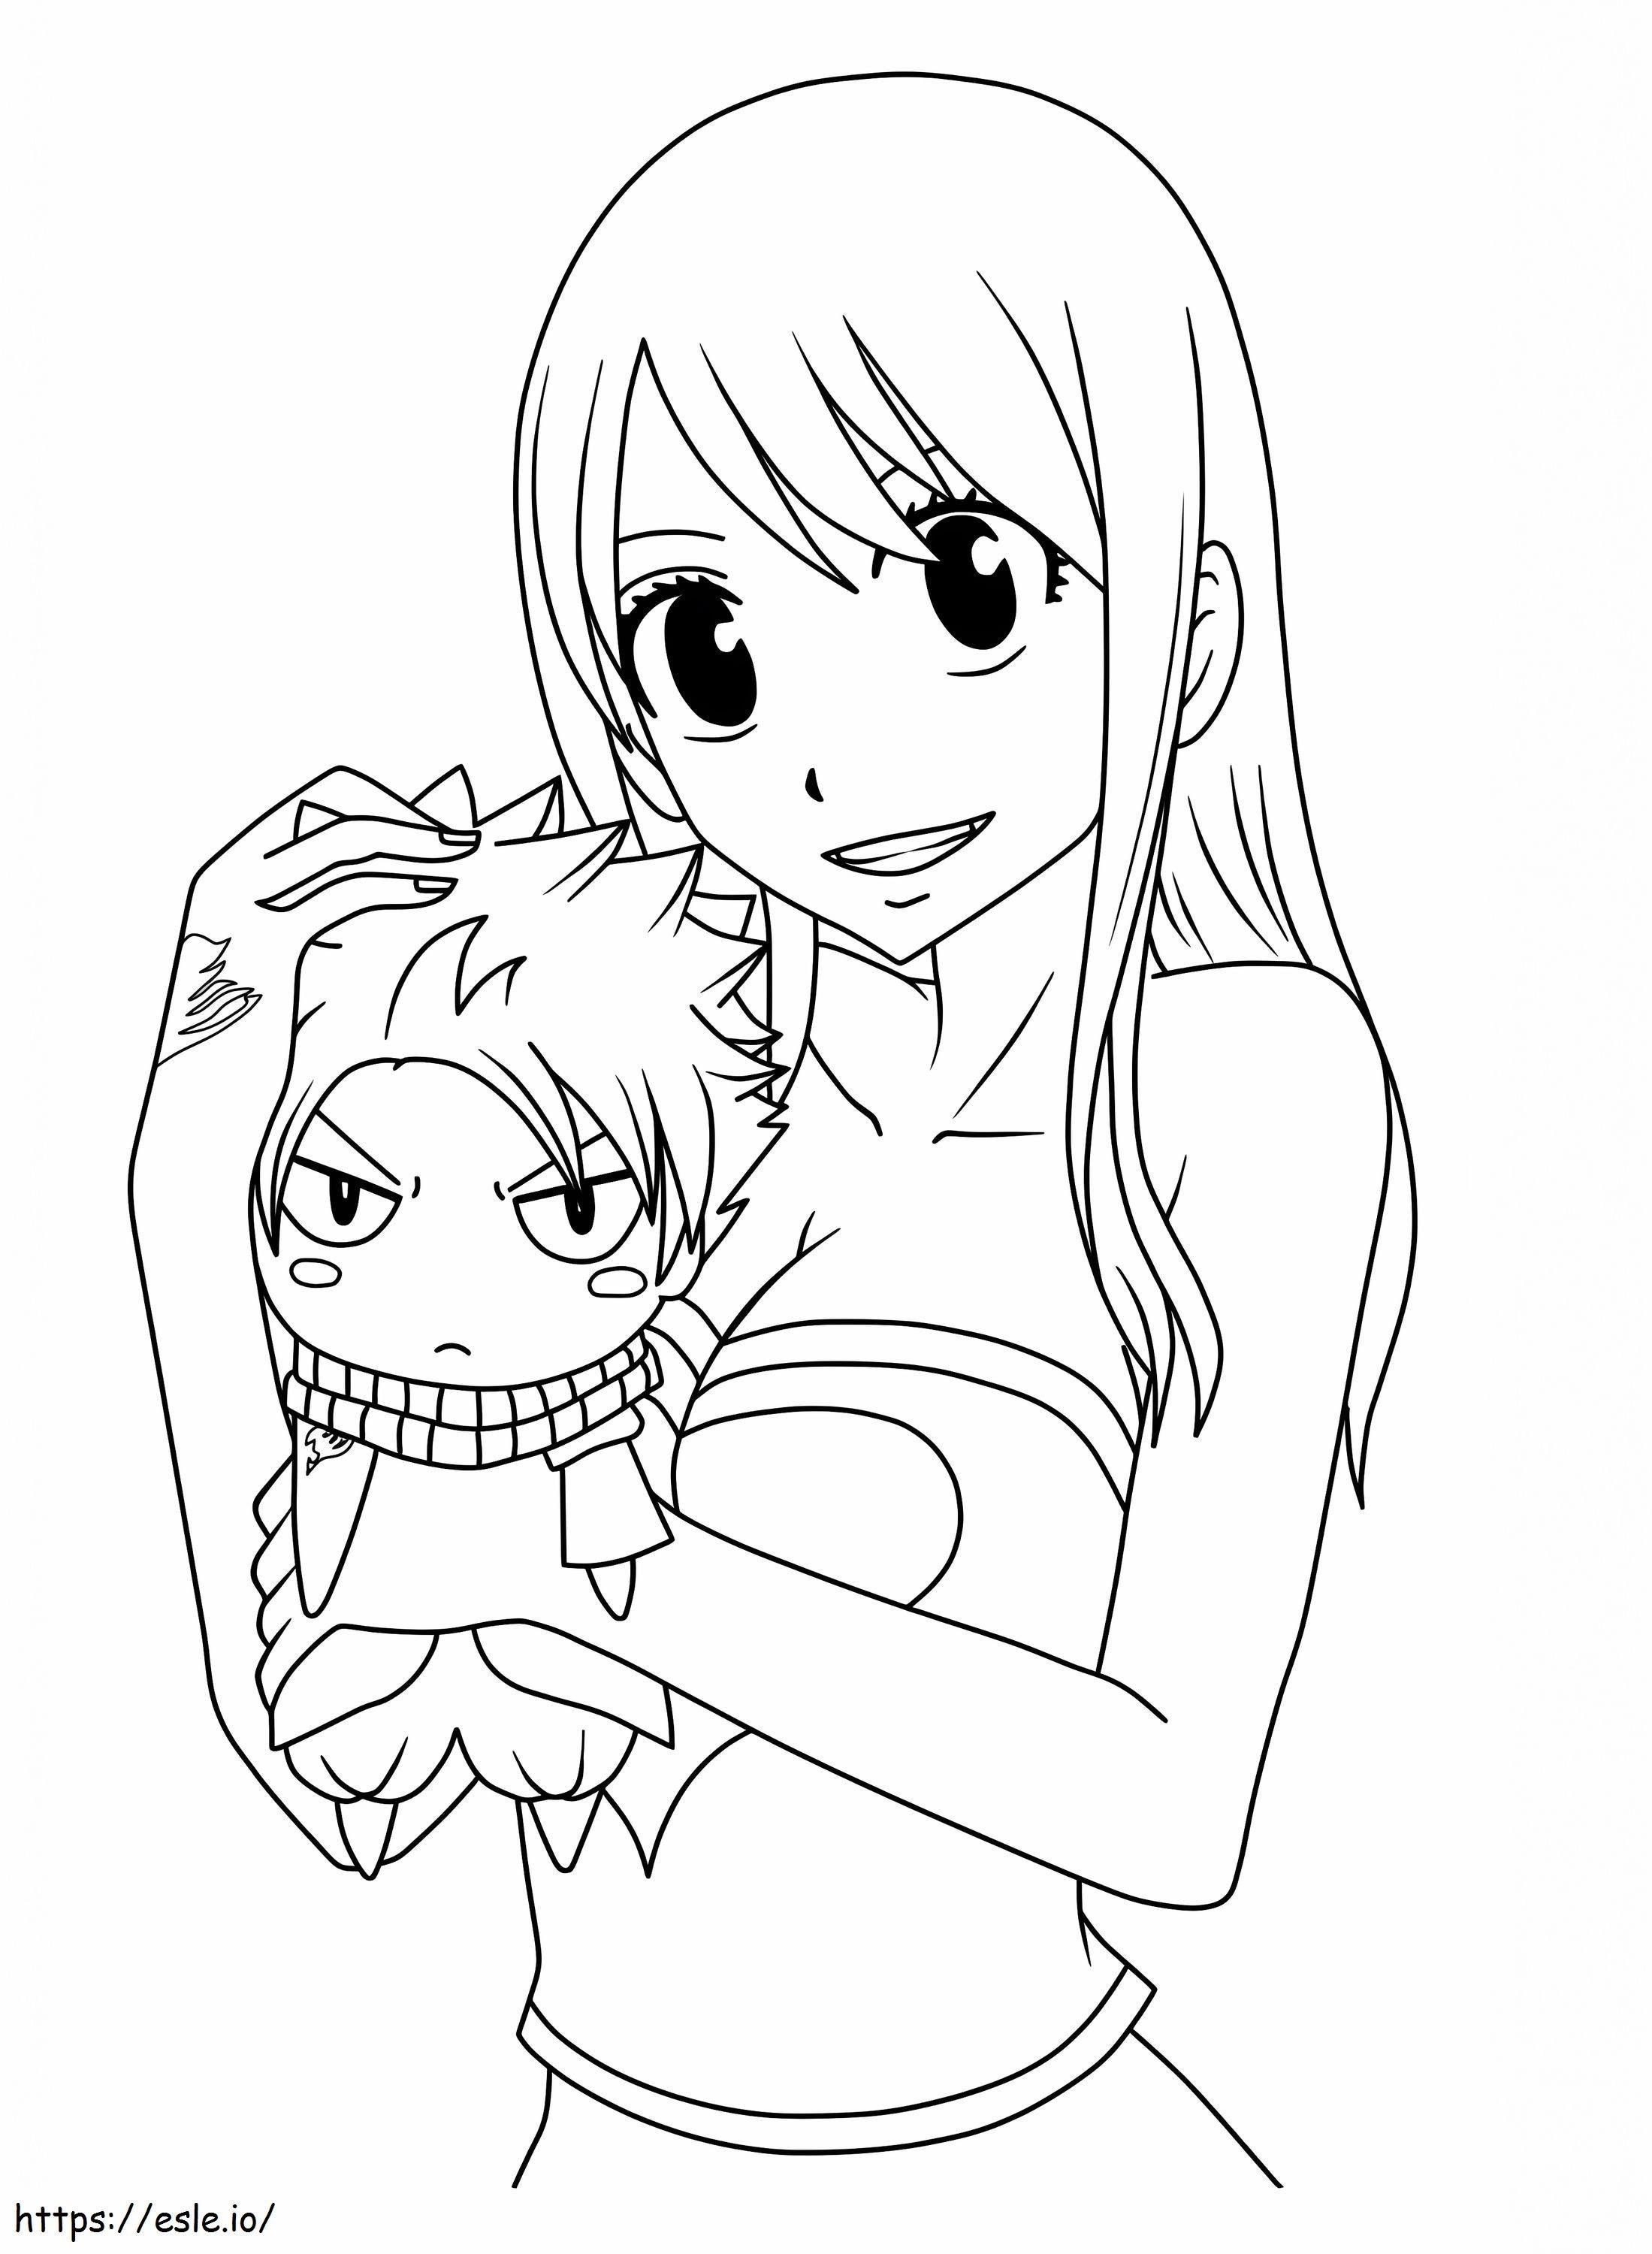 Cute Lucy coloring page